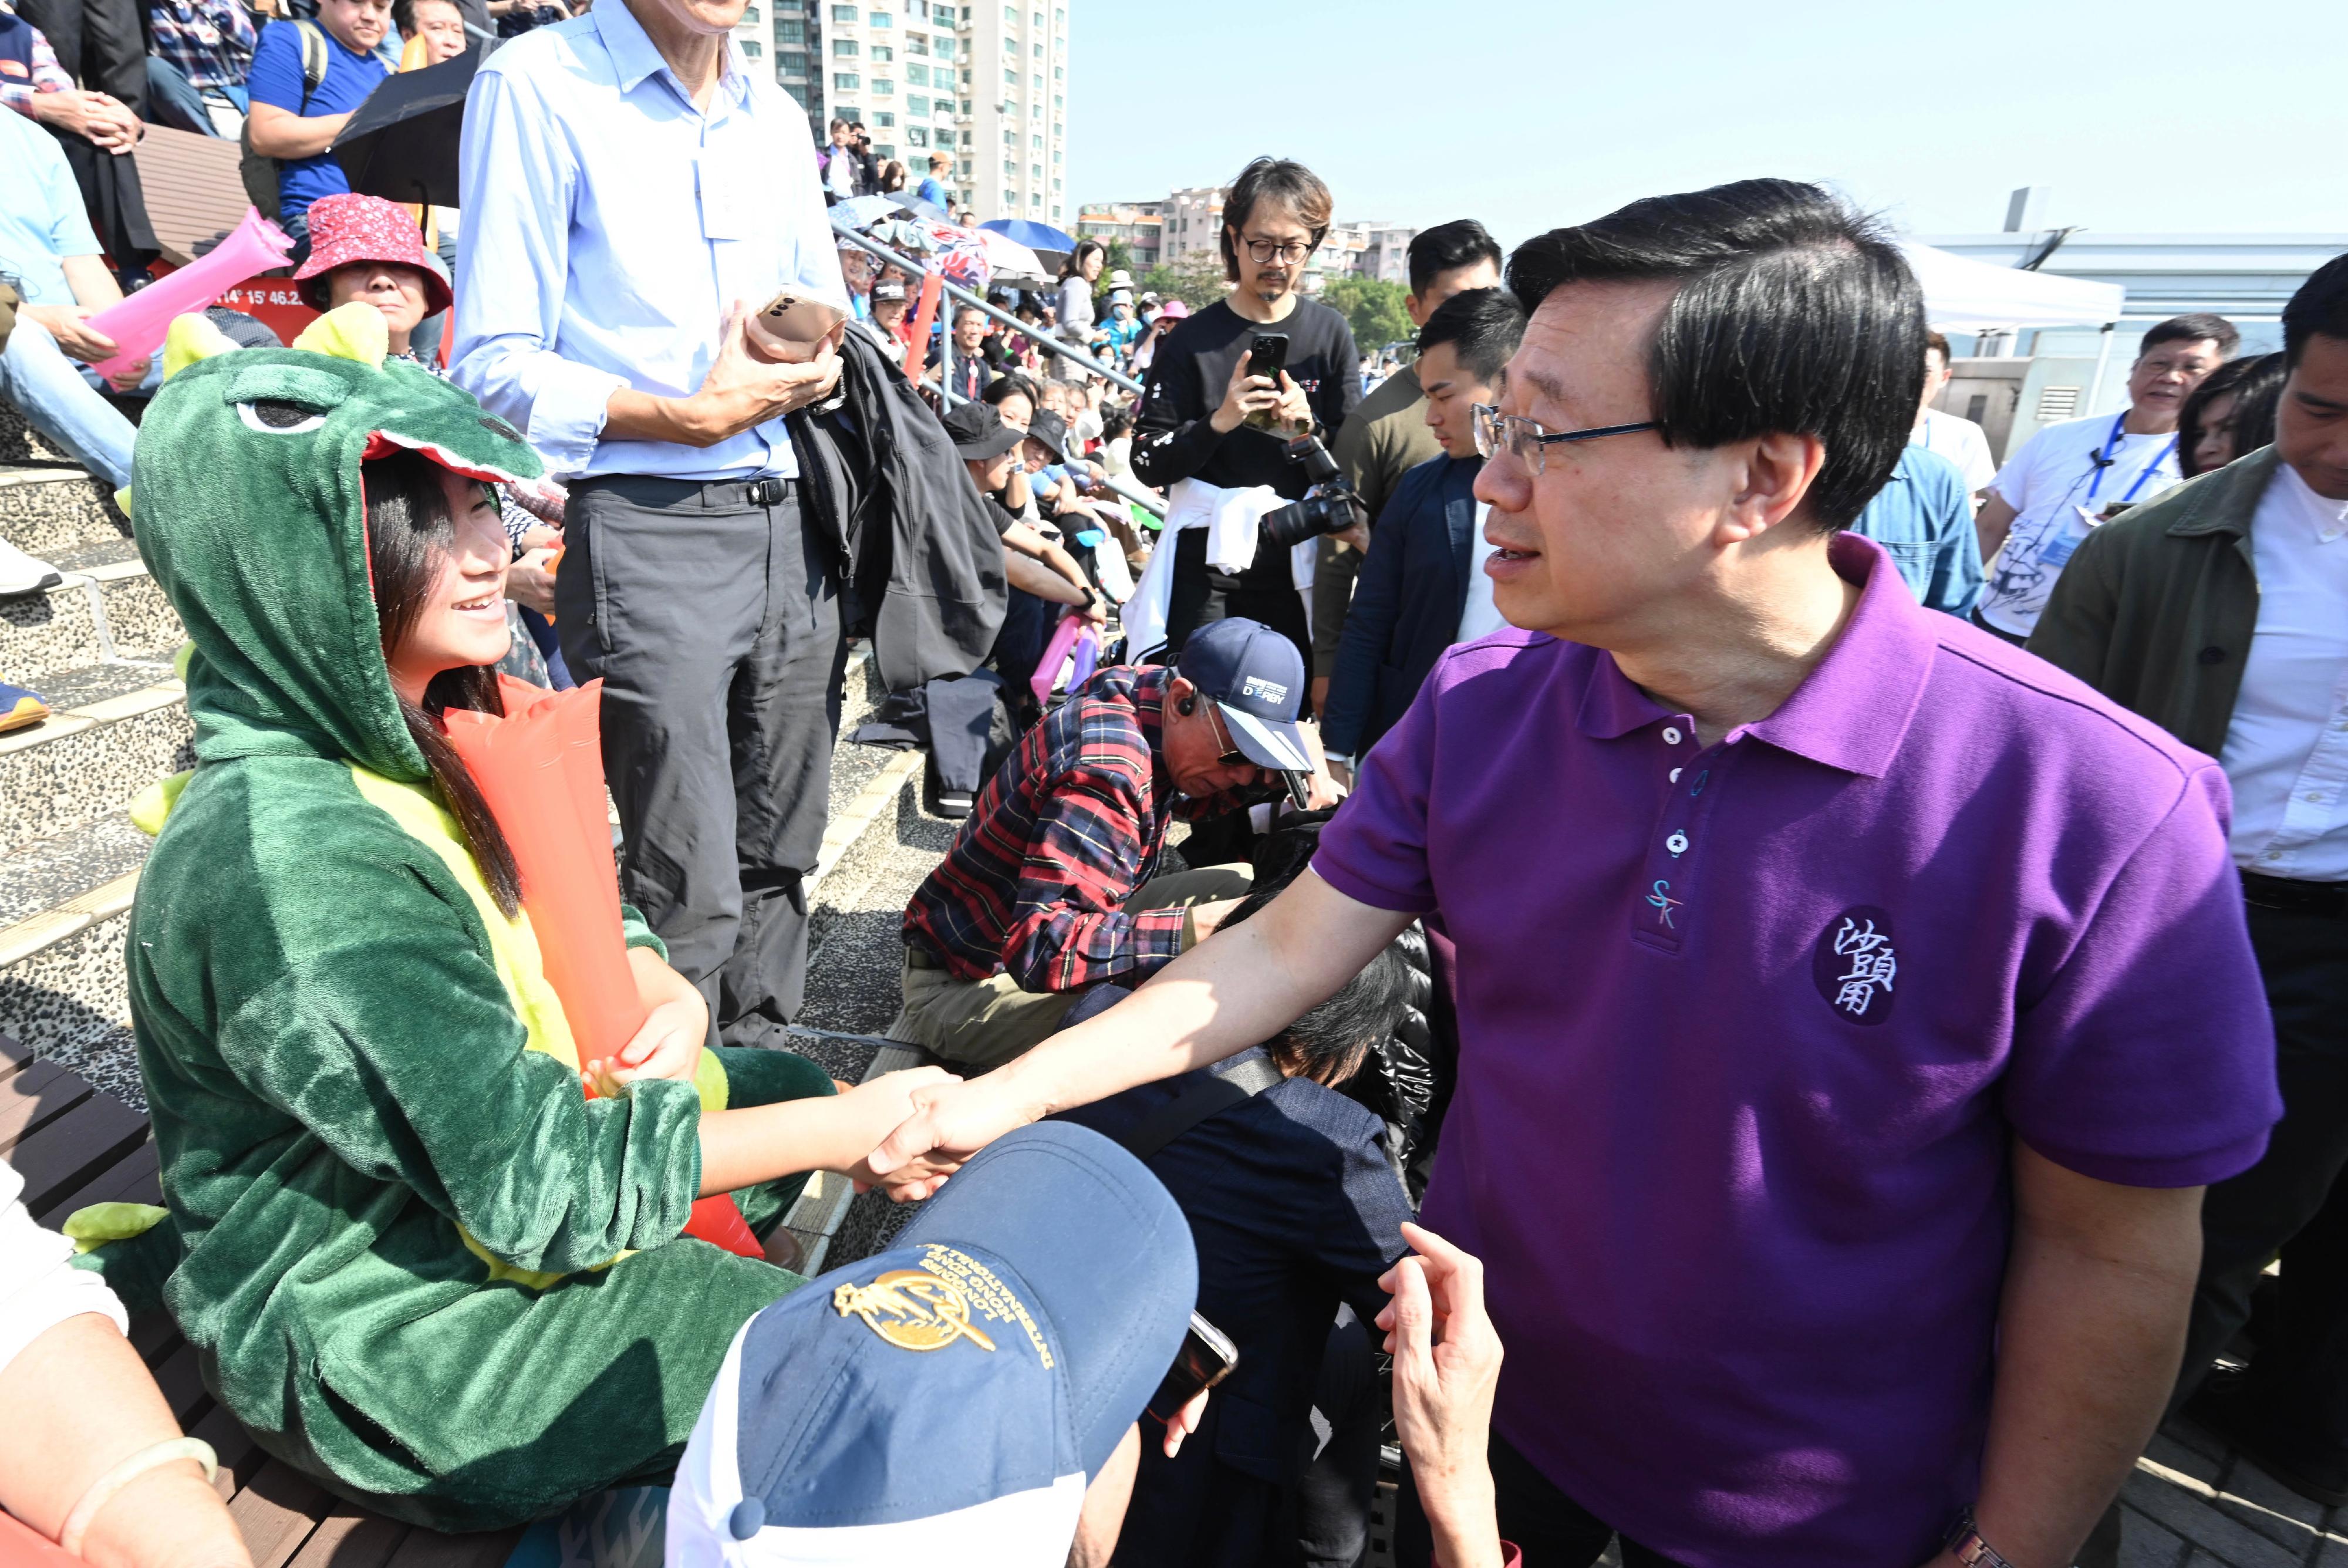 The Chief Executive, Mr John Lee, officiated at the Second Phase Opening-up of Sha Tau Kok Launching Ceremony today (January 6). Photo shows Mr Lee (right) interacting with members of the public at the Sha Tau Kok Pier.